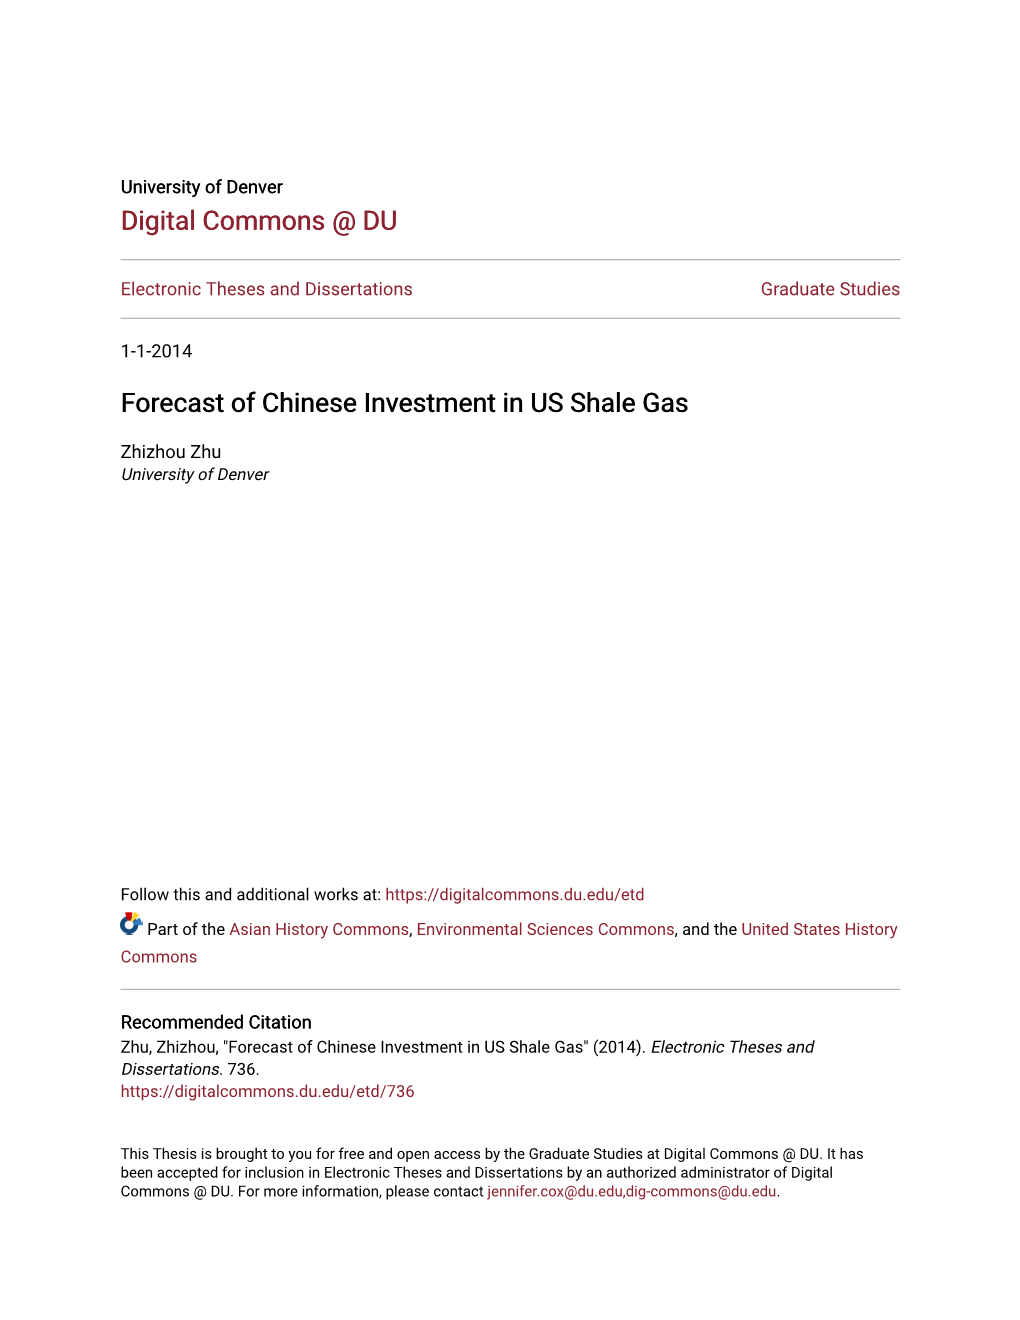 Forecast of Chinese Investment in US Shale Gas